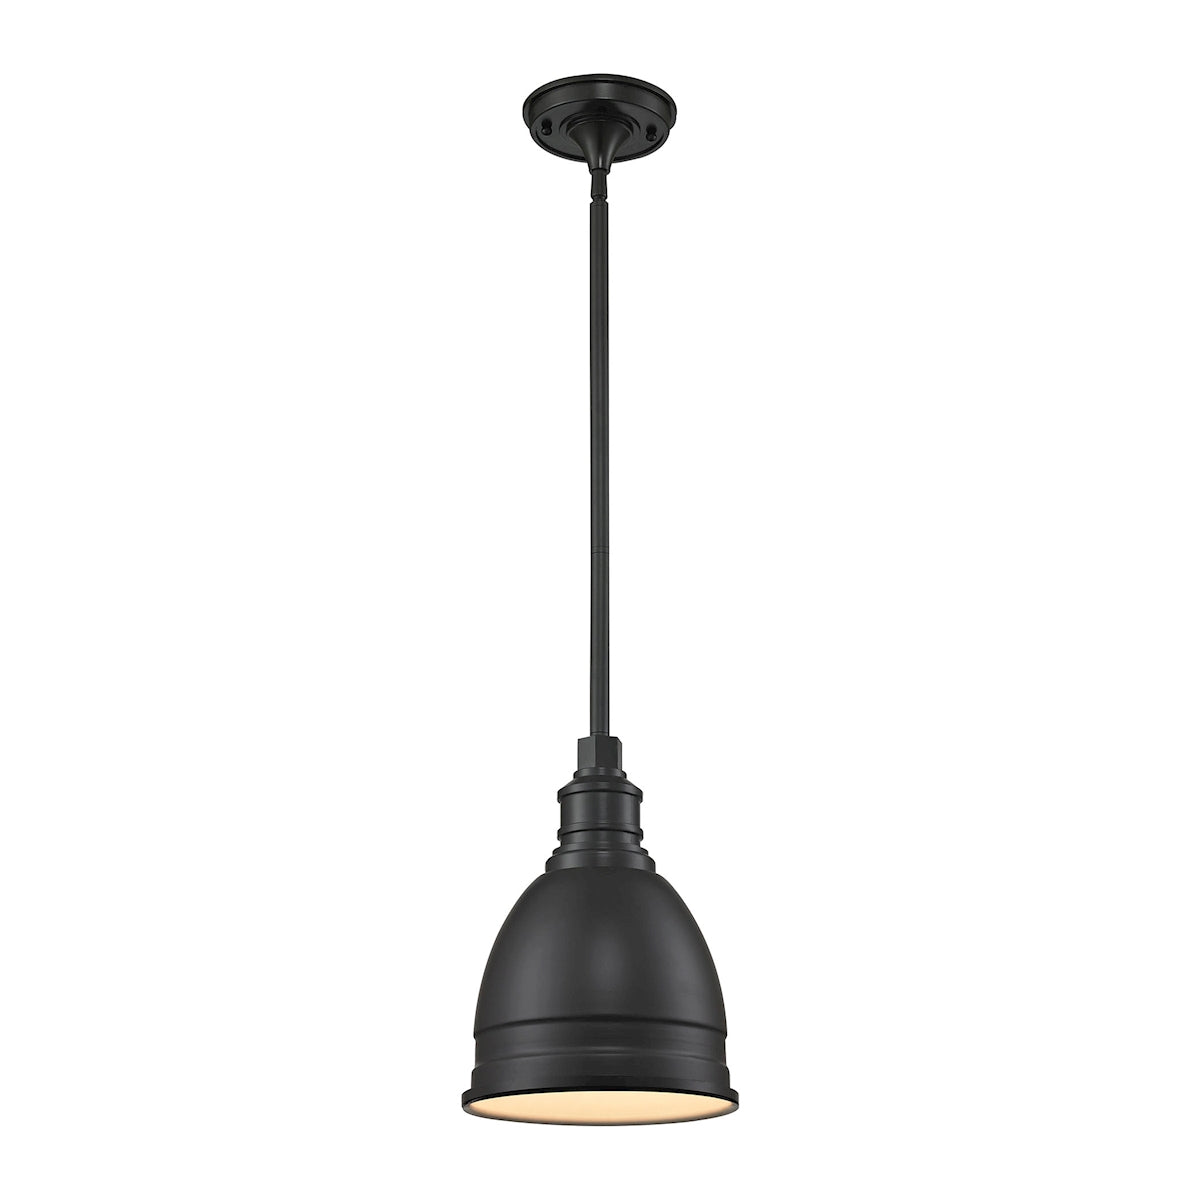 ELK Lighting 66860/1 Carolton 1-Light Mini Pendant in Oil Rubbed Bronze with Matching Shade